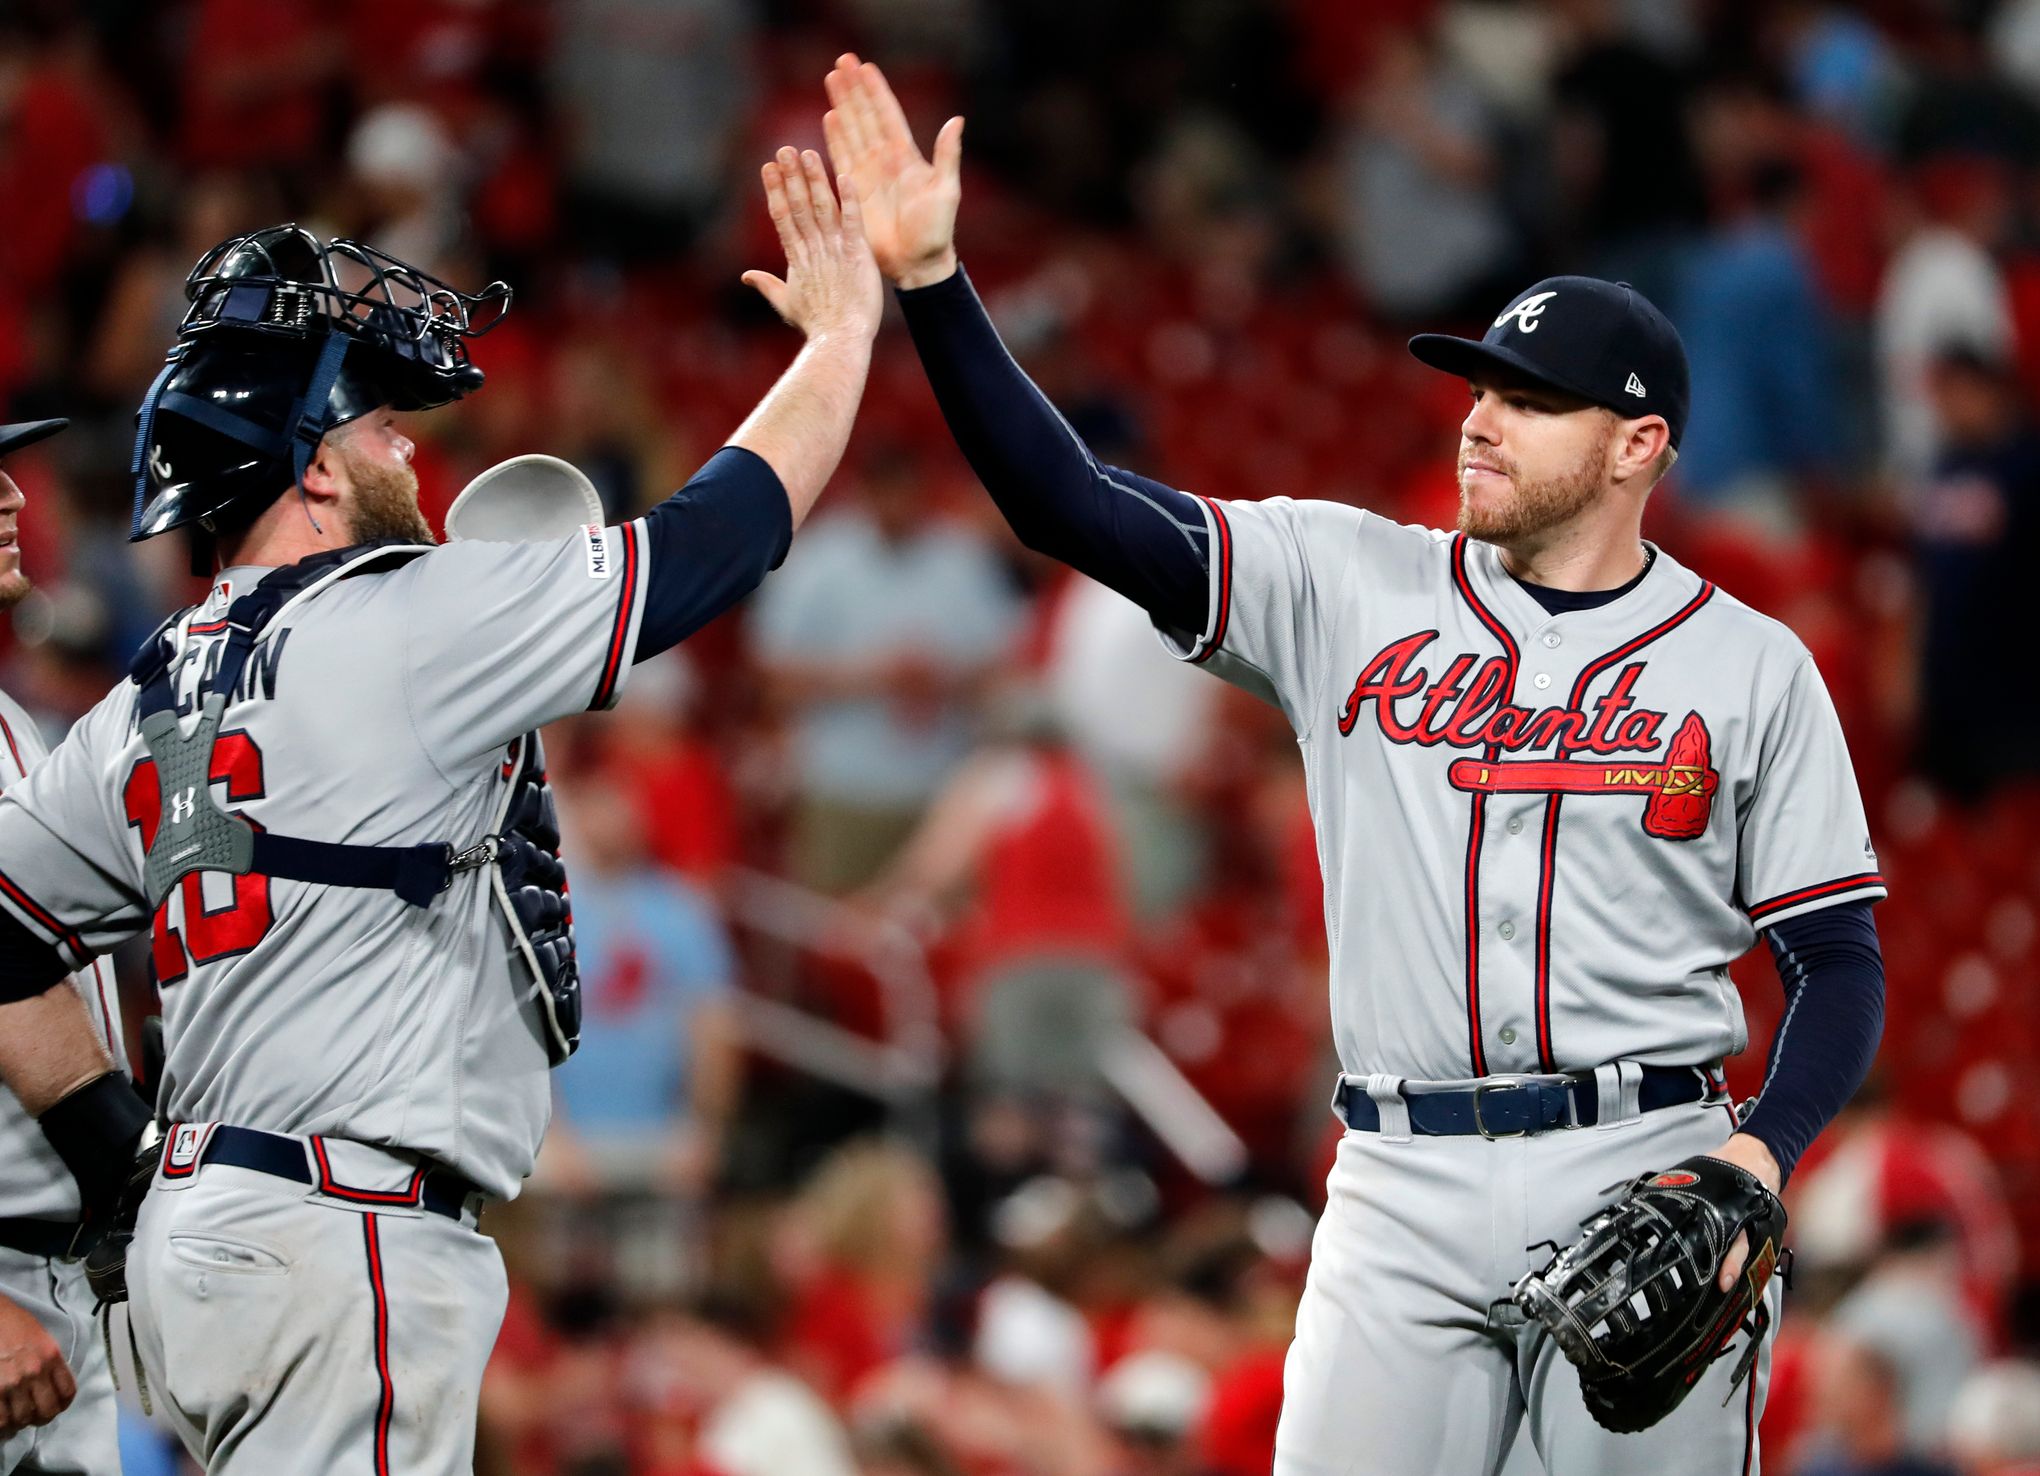 Atlanta Braves - Brian McCann celebrates in the dugout after his